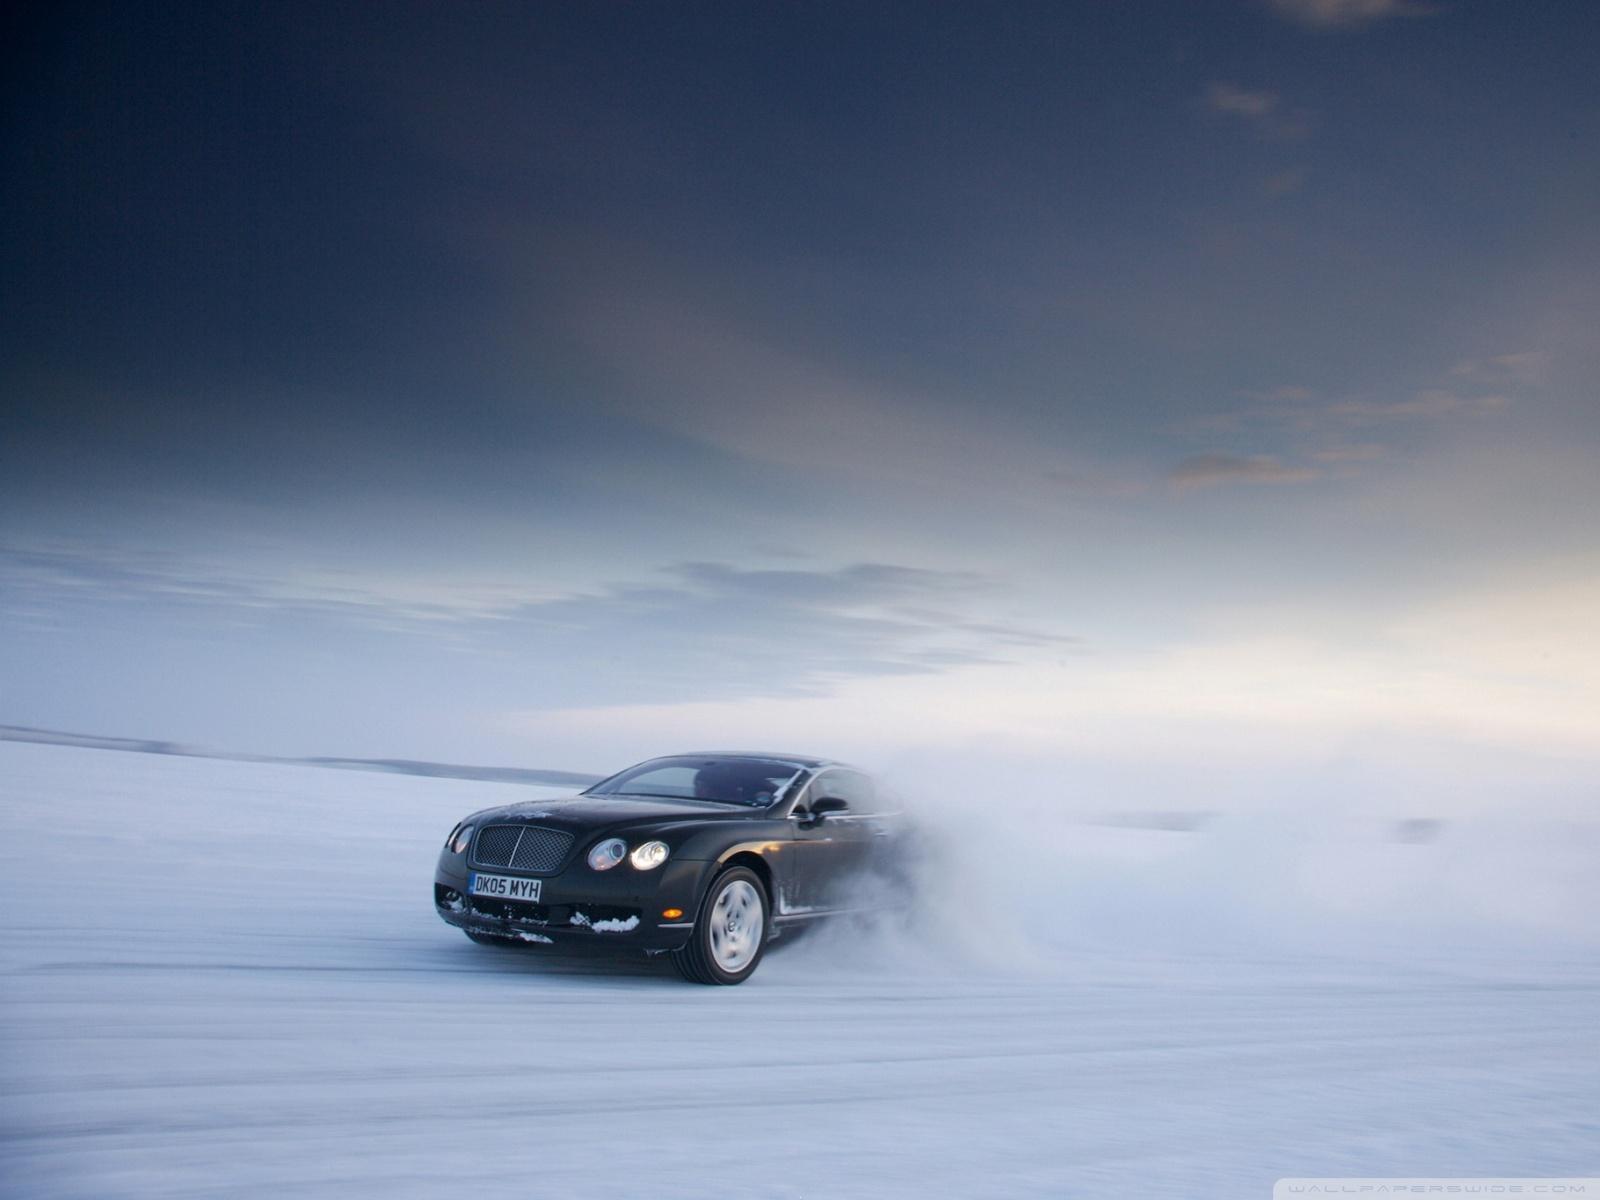 Download Bentley wallpaper(2) - Cars wallpapers for your mobile cell phone